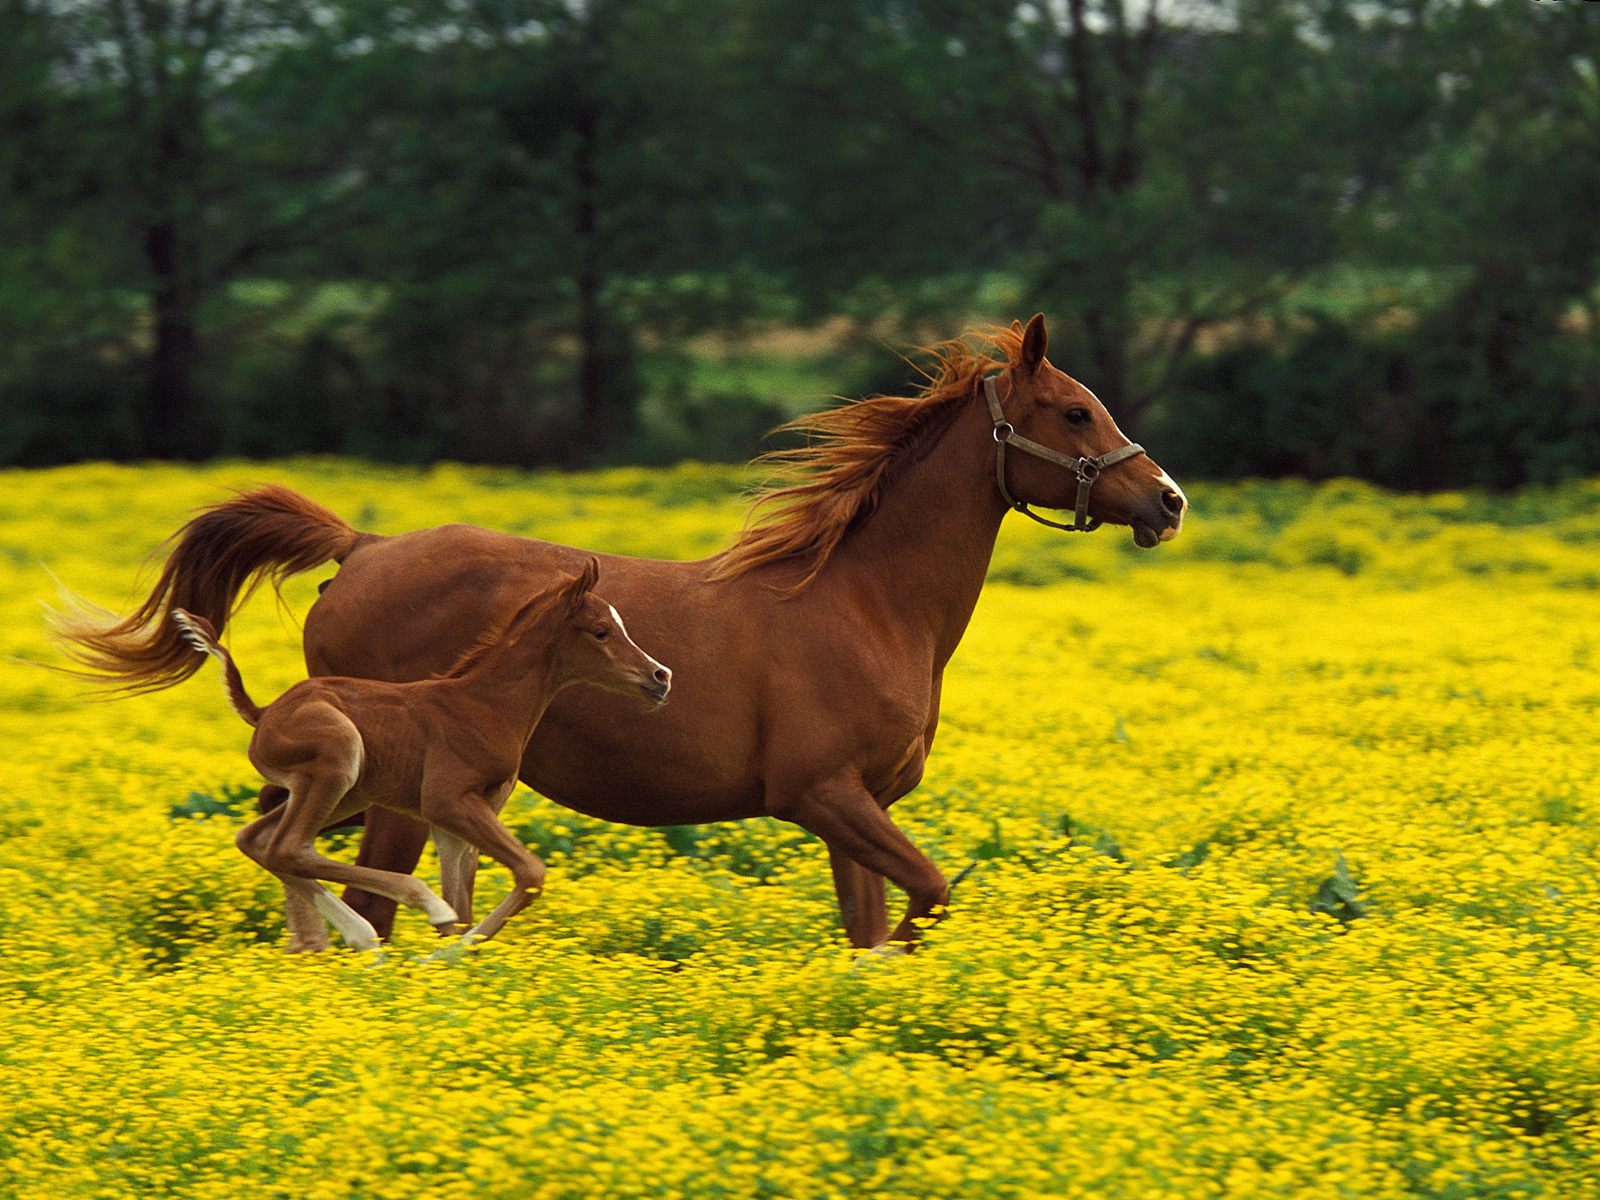 The Wallpaper Backgrounds Free Horse Wallpaper